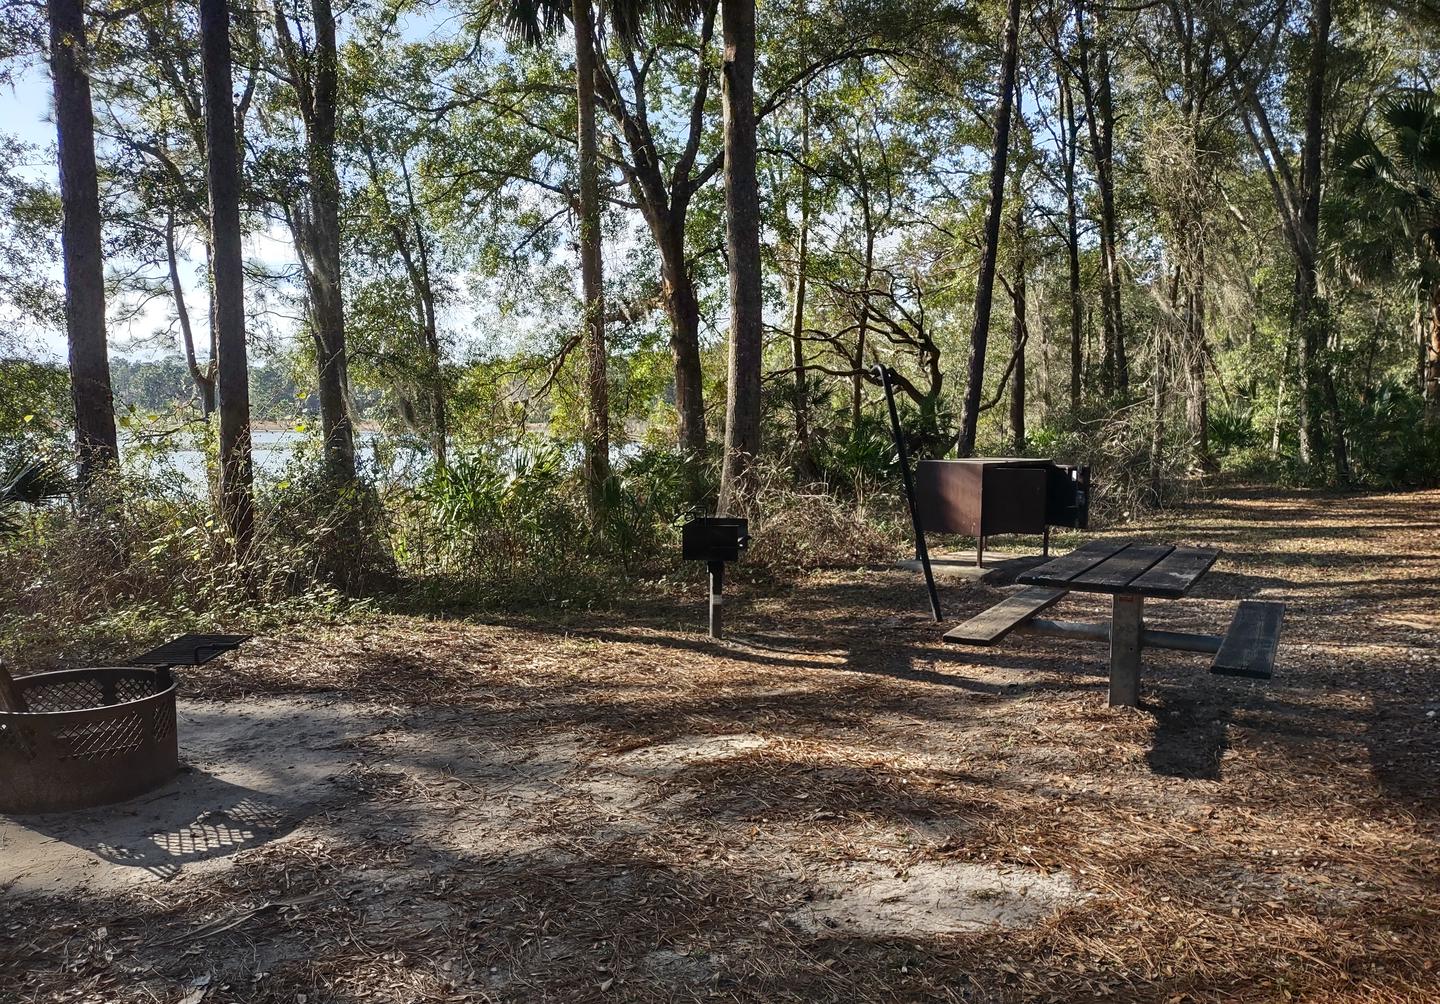 Another view of site 15Amenities: picnic table, grill, fire ring, light pole, bear-proof storage locker